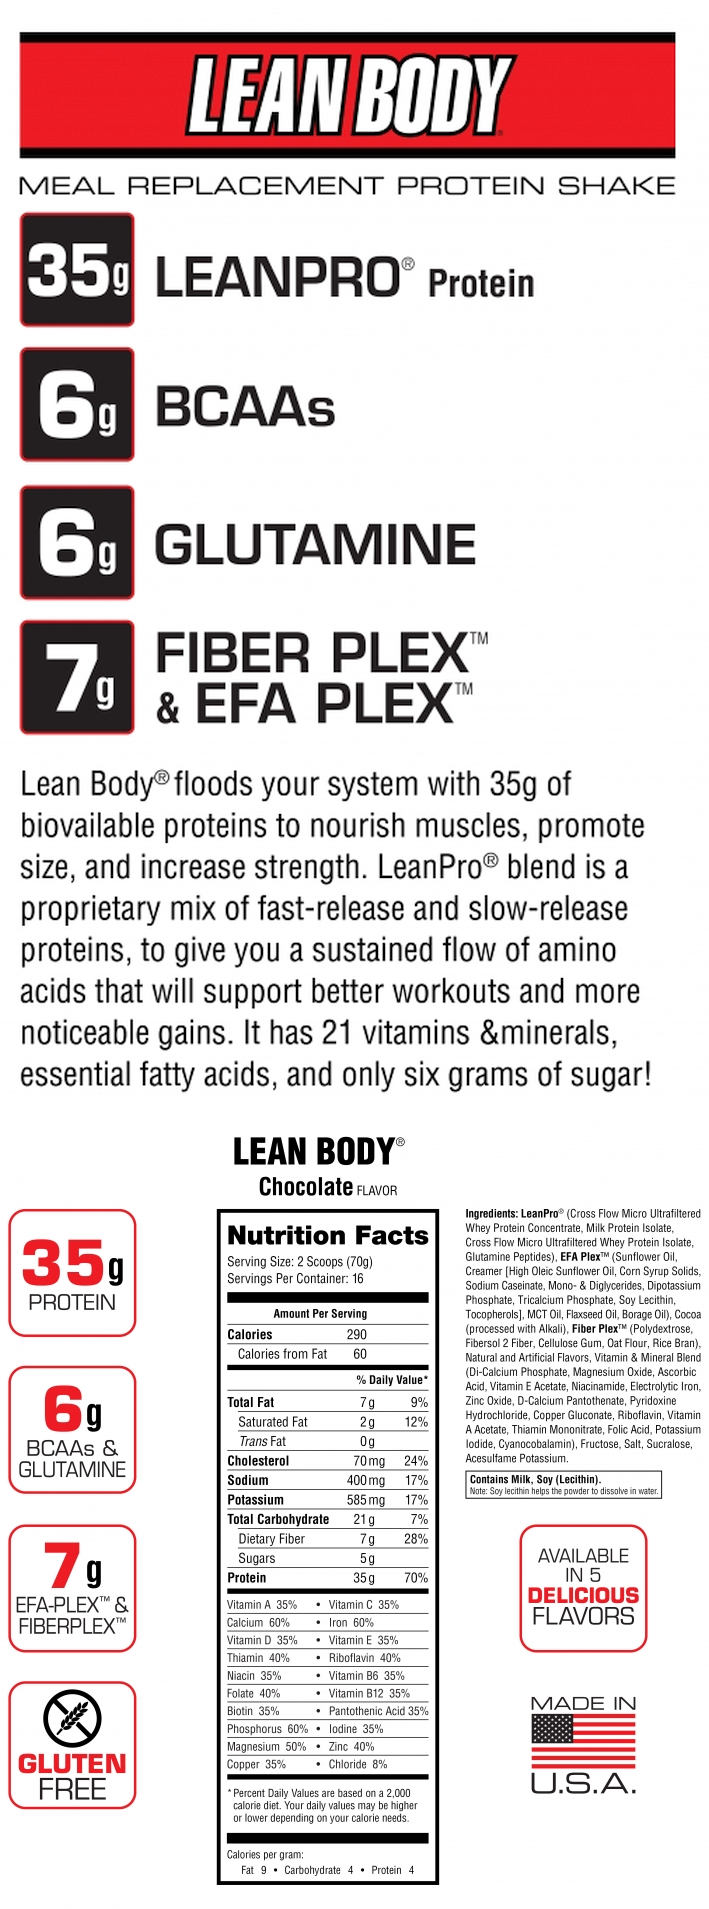 LeanBody® chocolate protein shake contains 35g of protein offering a mix of fast & slow release proteins, vitamins, minerals, EFA Plex™, and Fiber Plex™.